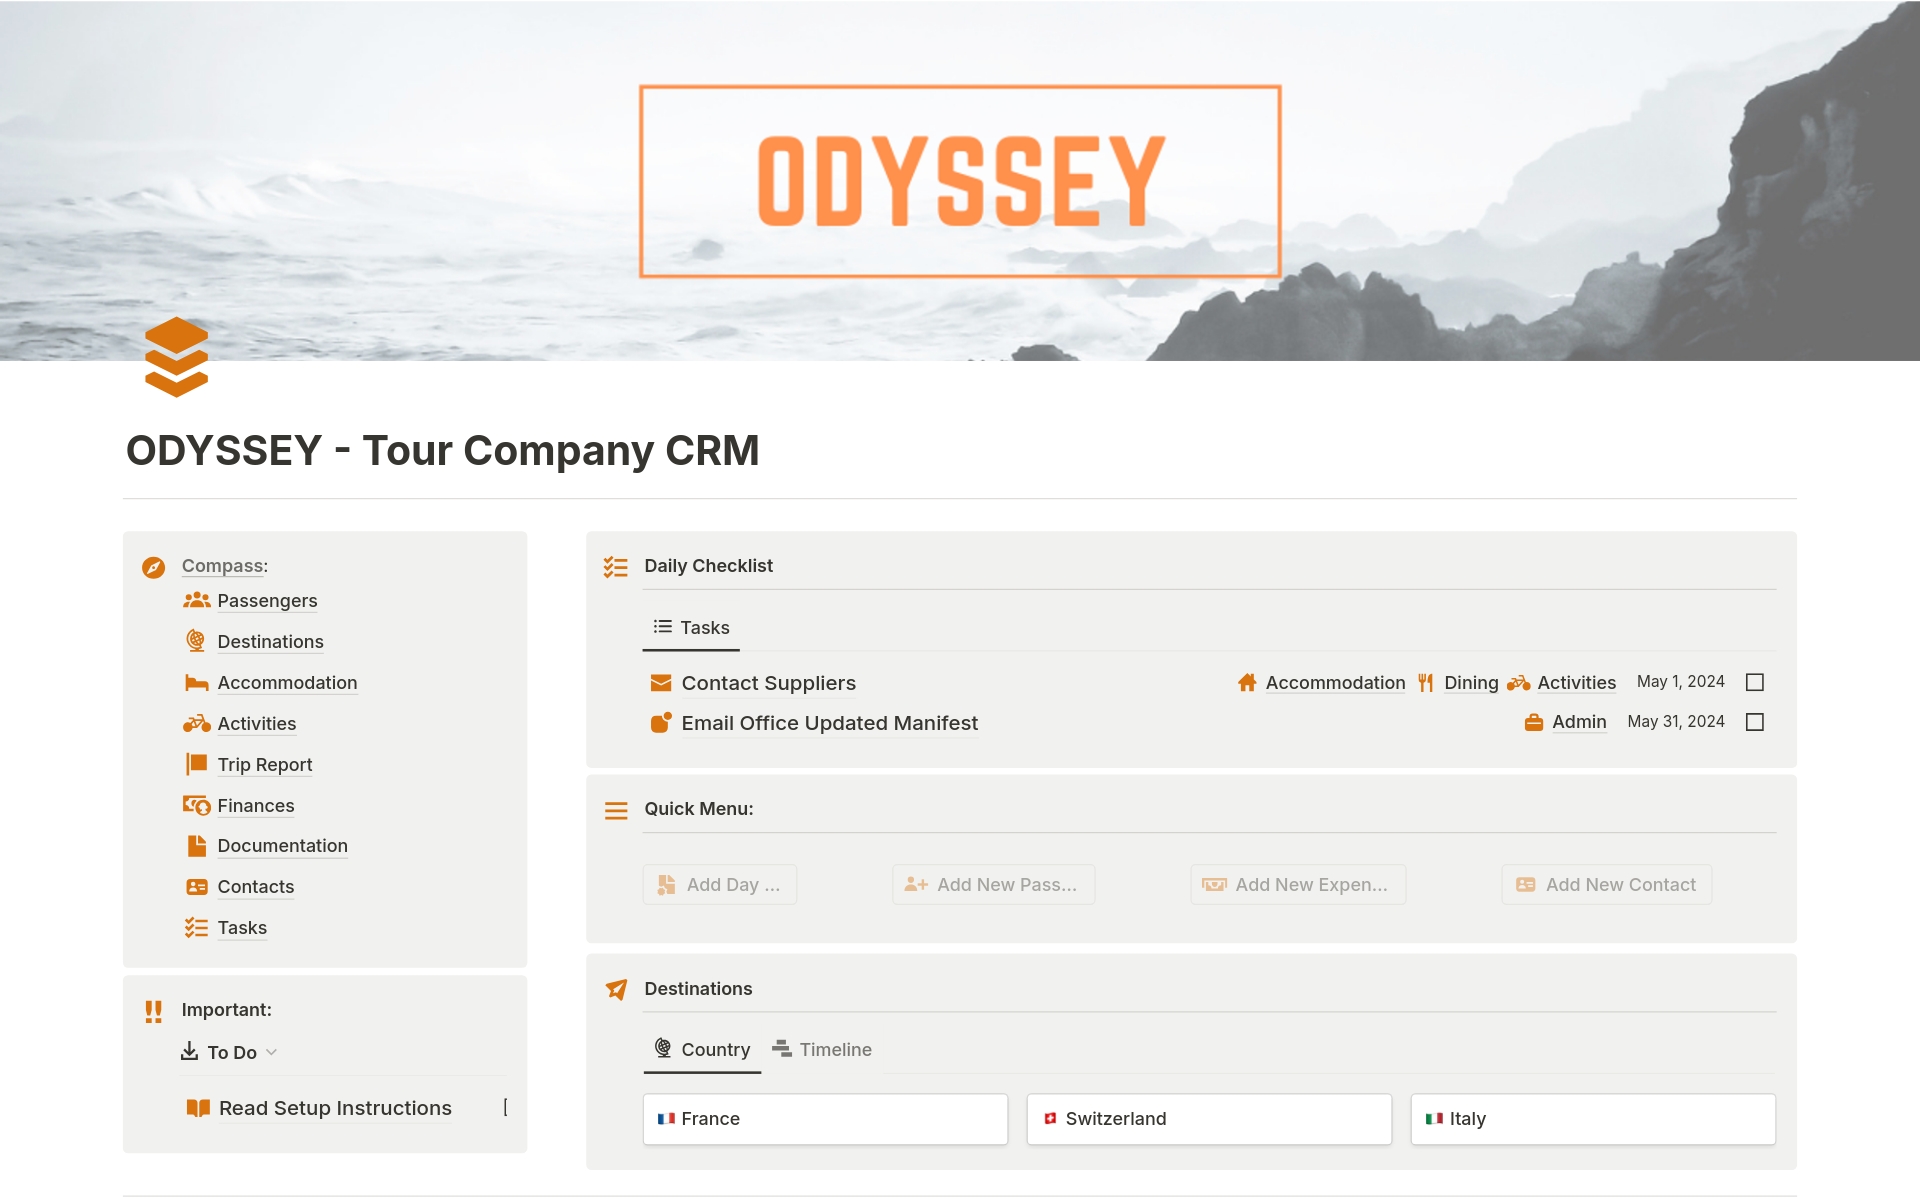 Odyssey, the Ultimate Tour Company CRM. Optimise tour operations with passenger management, task scheduling, destination planning, document filing, and finance tracking all in one convenient central hub.